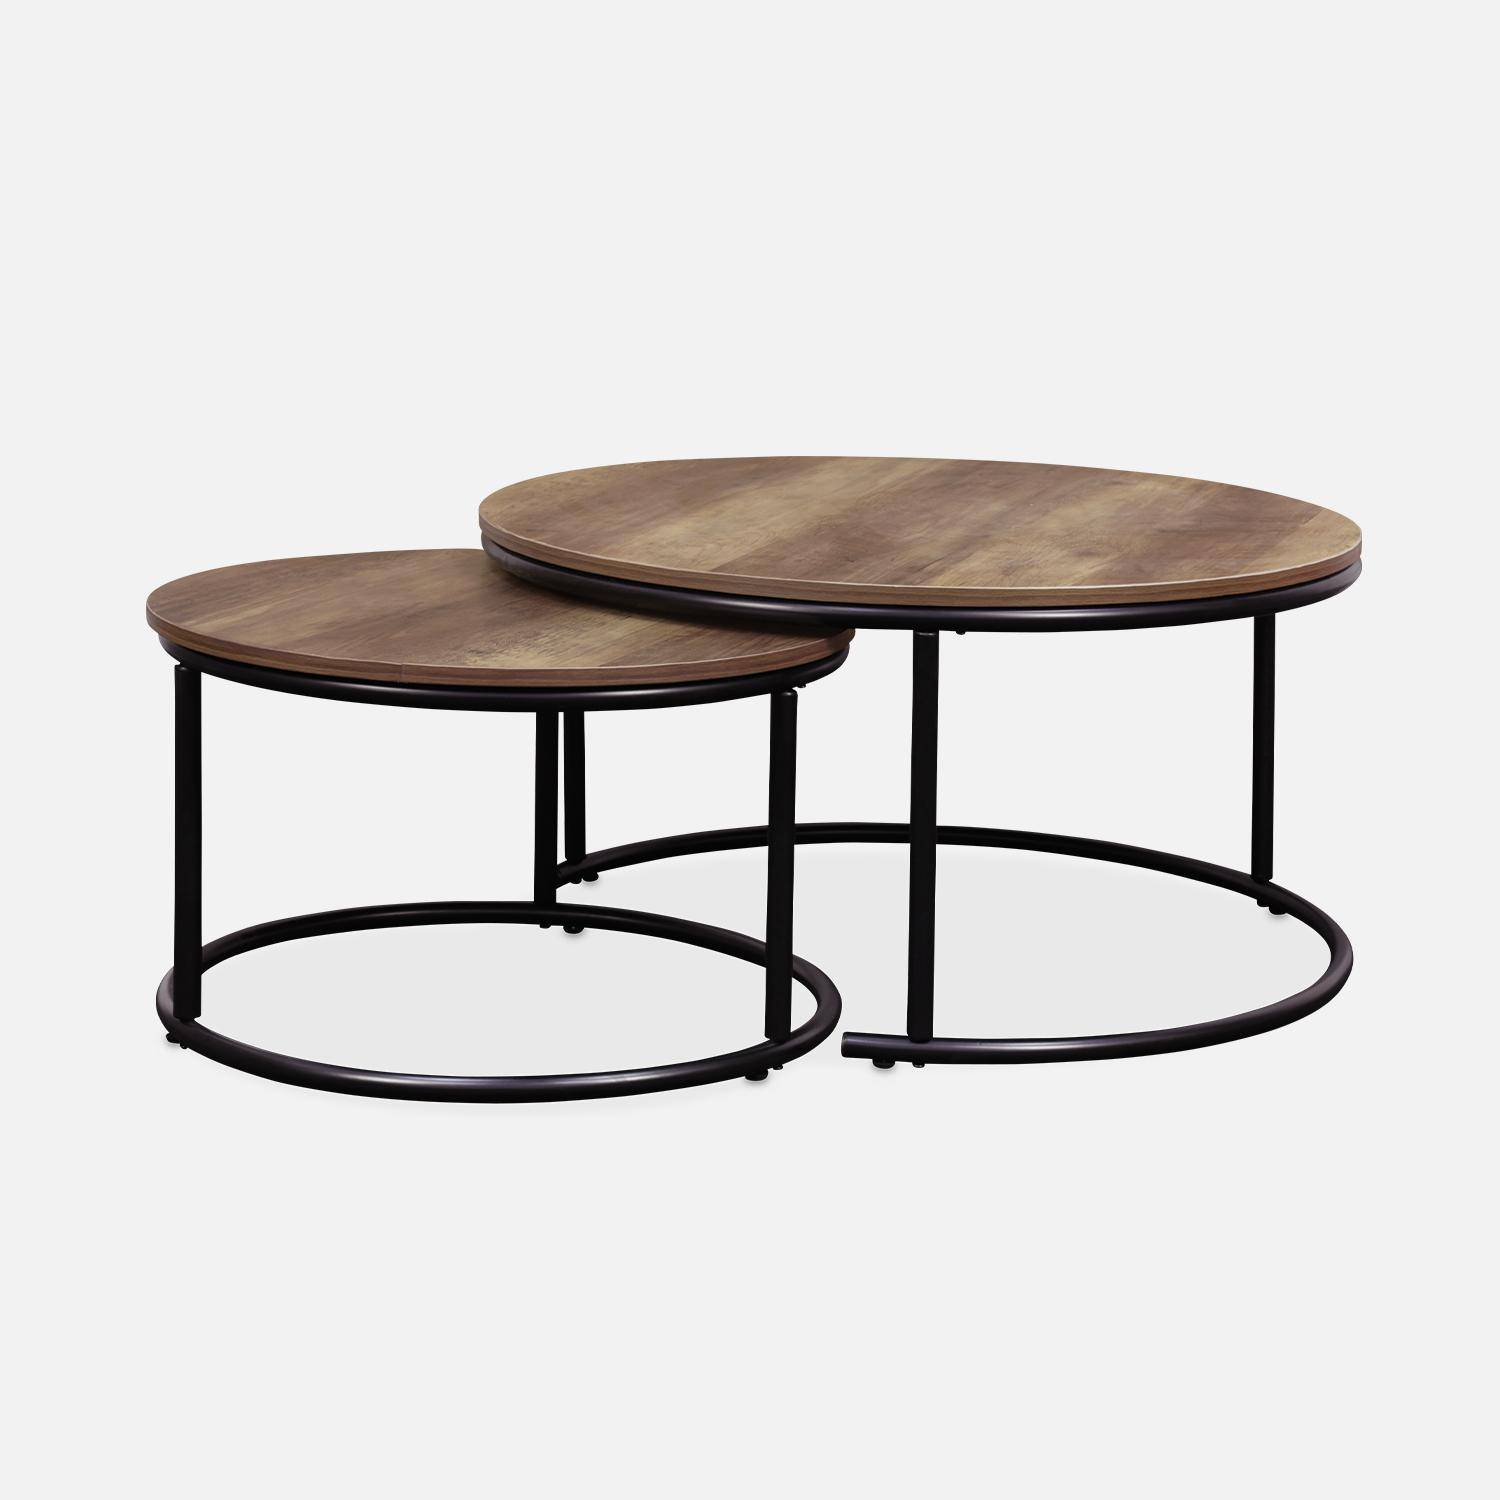 Pair of round, metal and wood-effect nesting coffee tables, 77x40x57cm - Loft Photo4